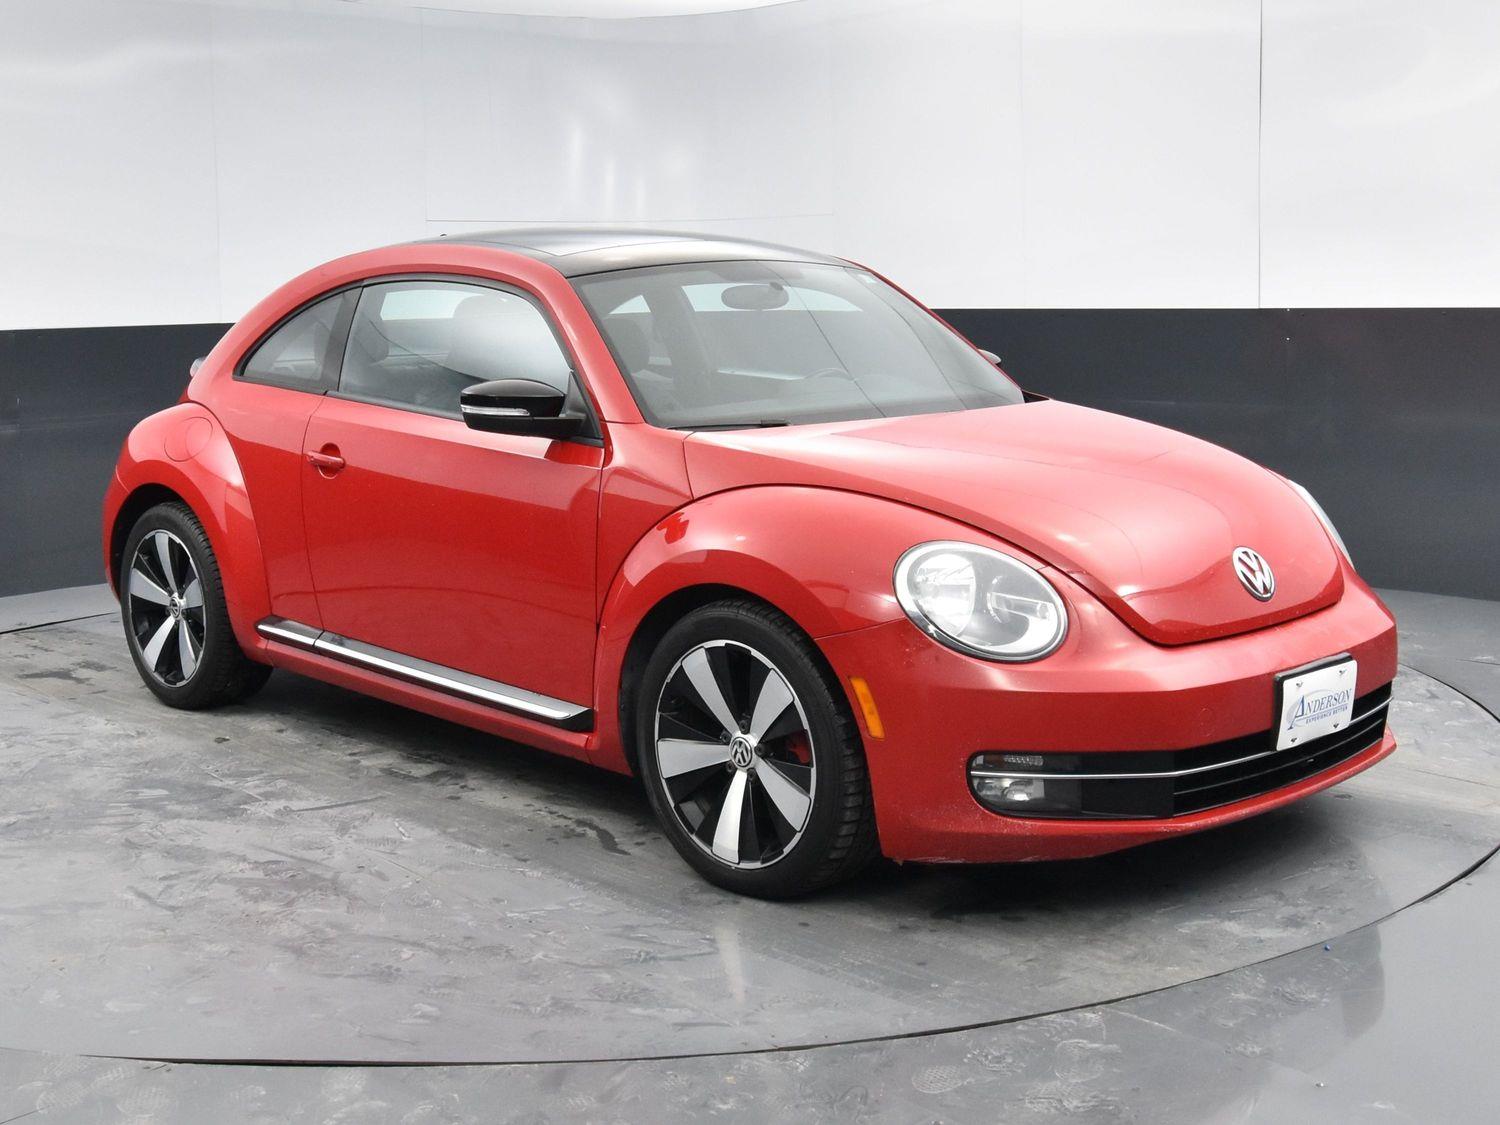 Used 2012 Volkswagen Beetle 2.0T Turbo w/Sun/Sound Coupe for sale in Grand Island NE